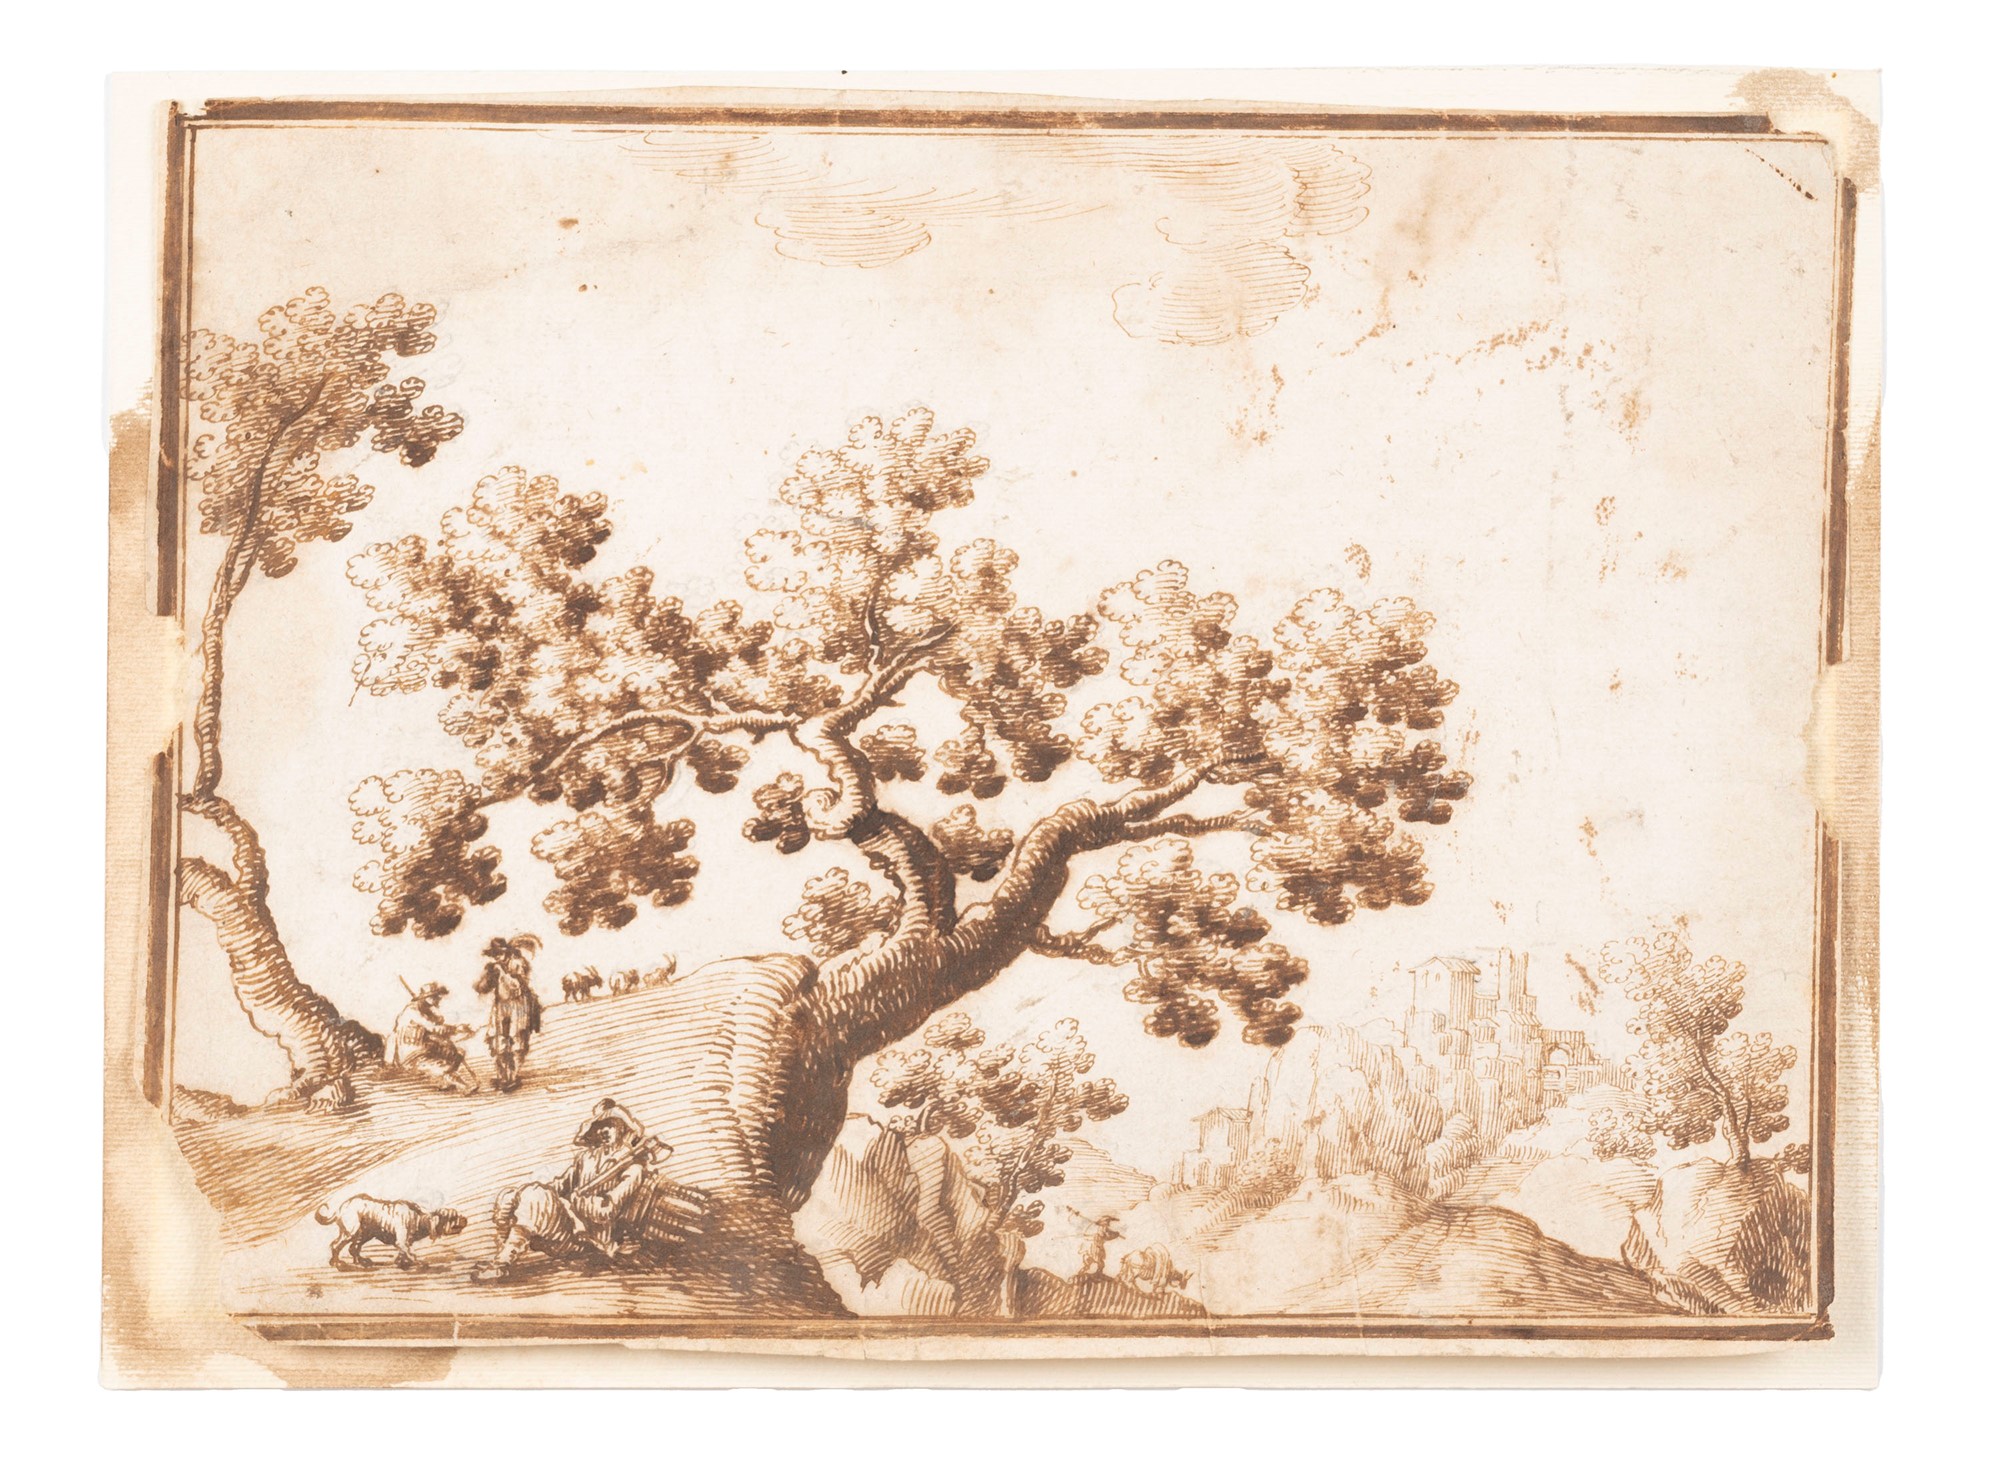 Tuscan school, sixteenth century - Landscape with tree, rocky spur and resting figures